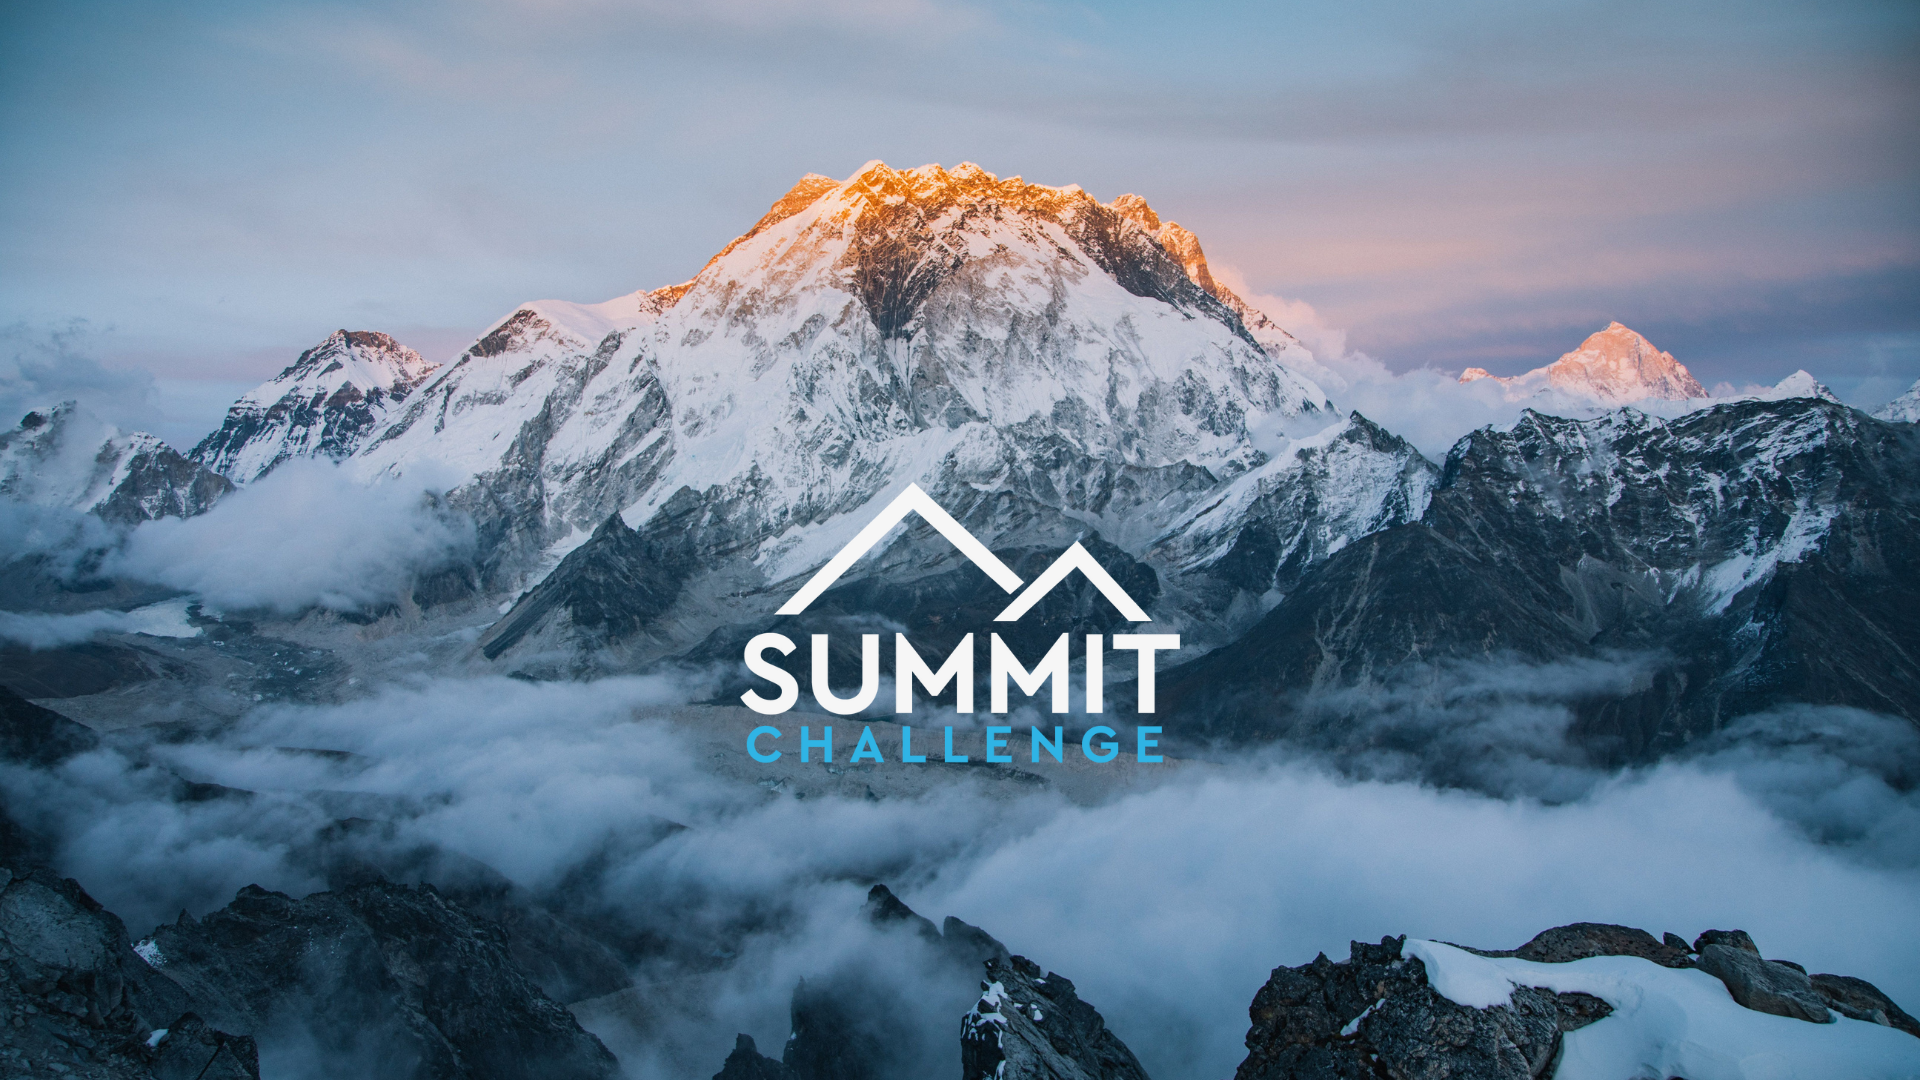 Summit Challenge by the Himalayan Trust